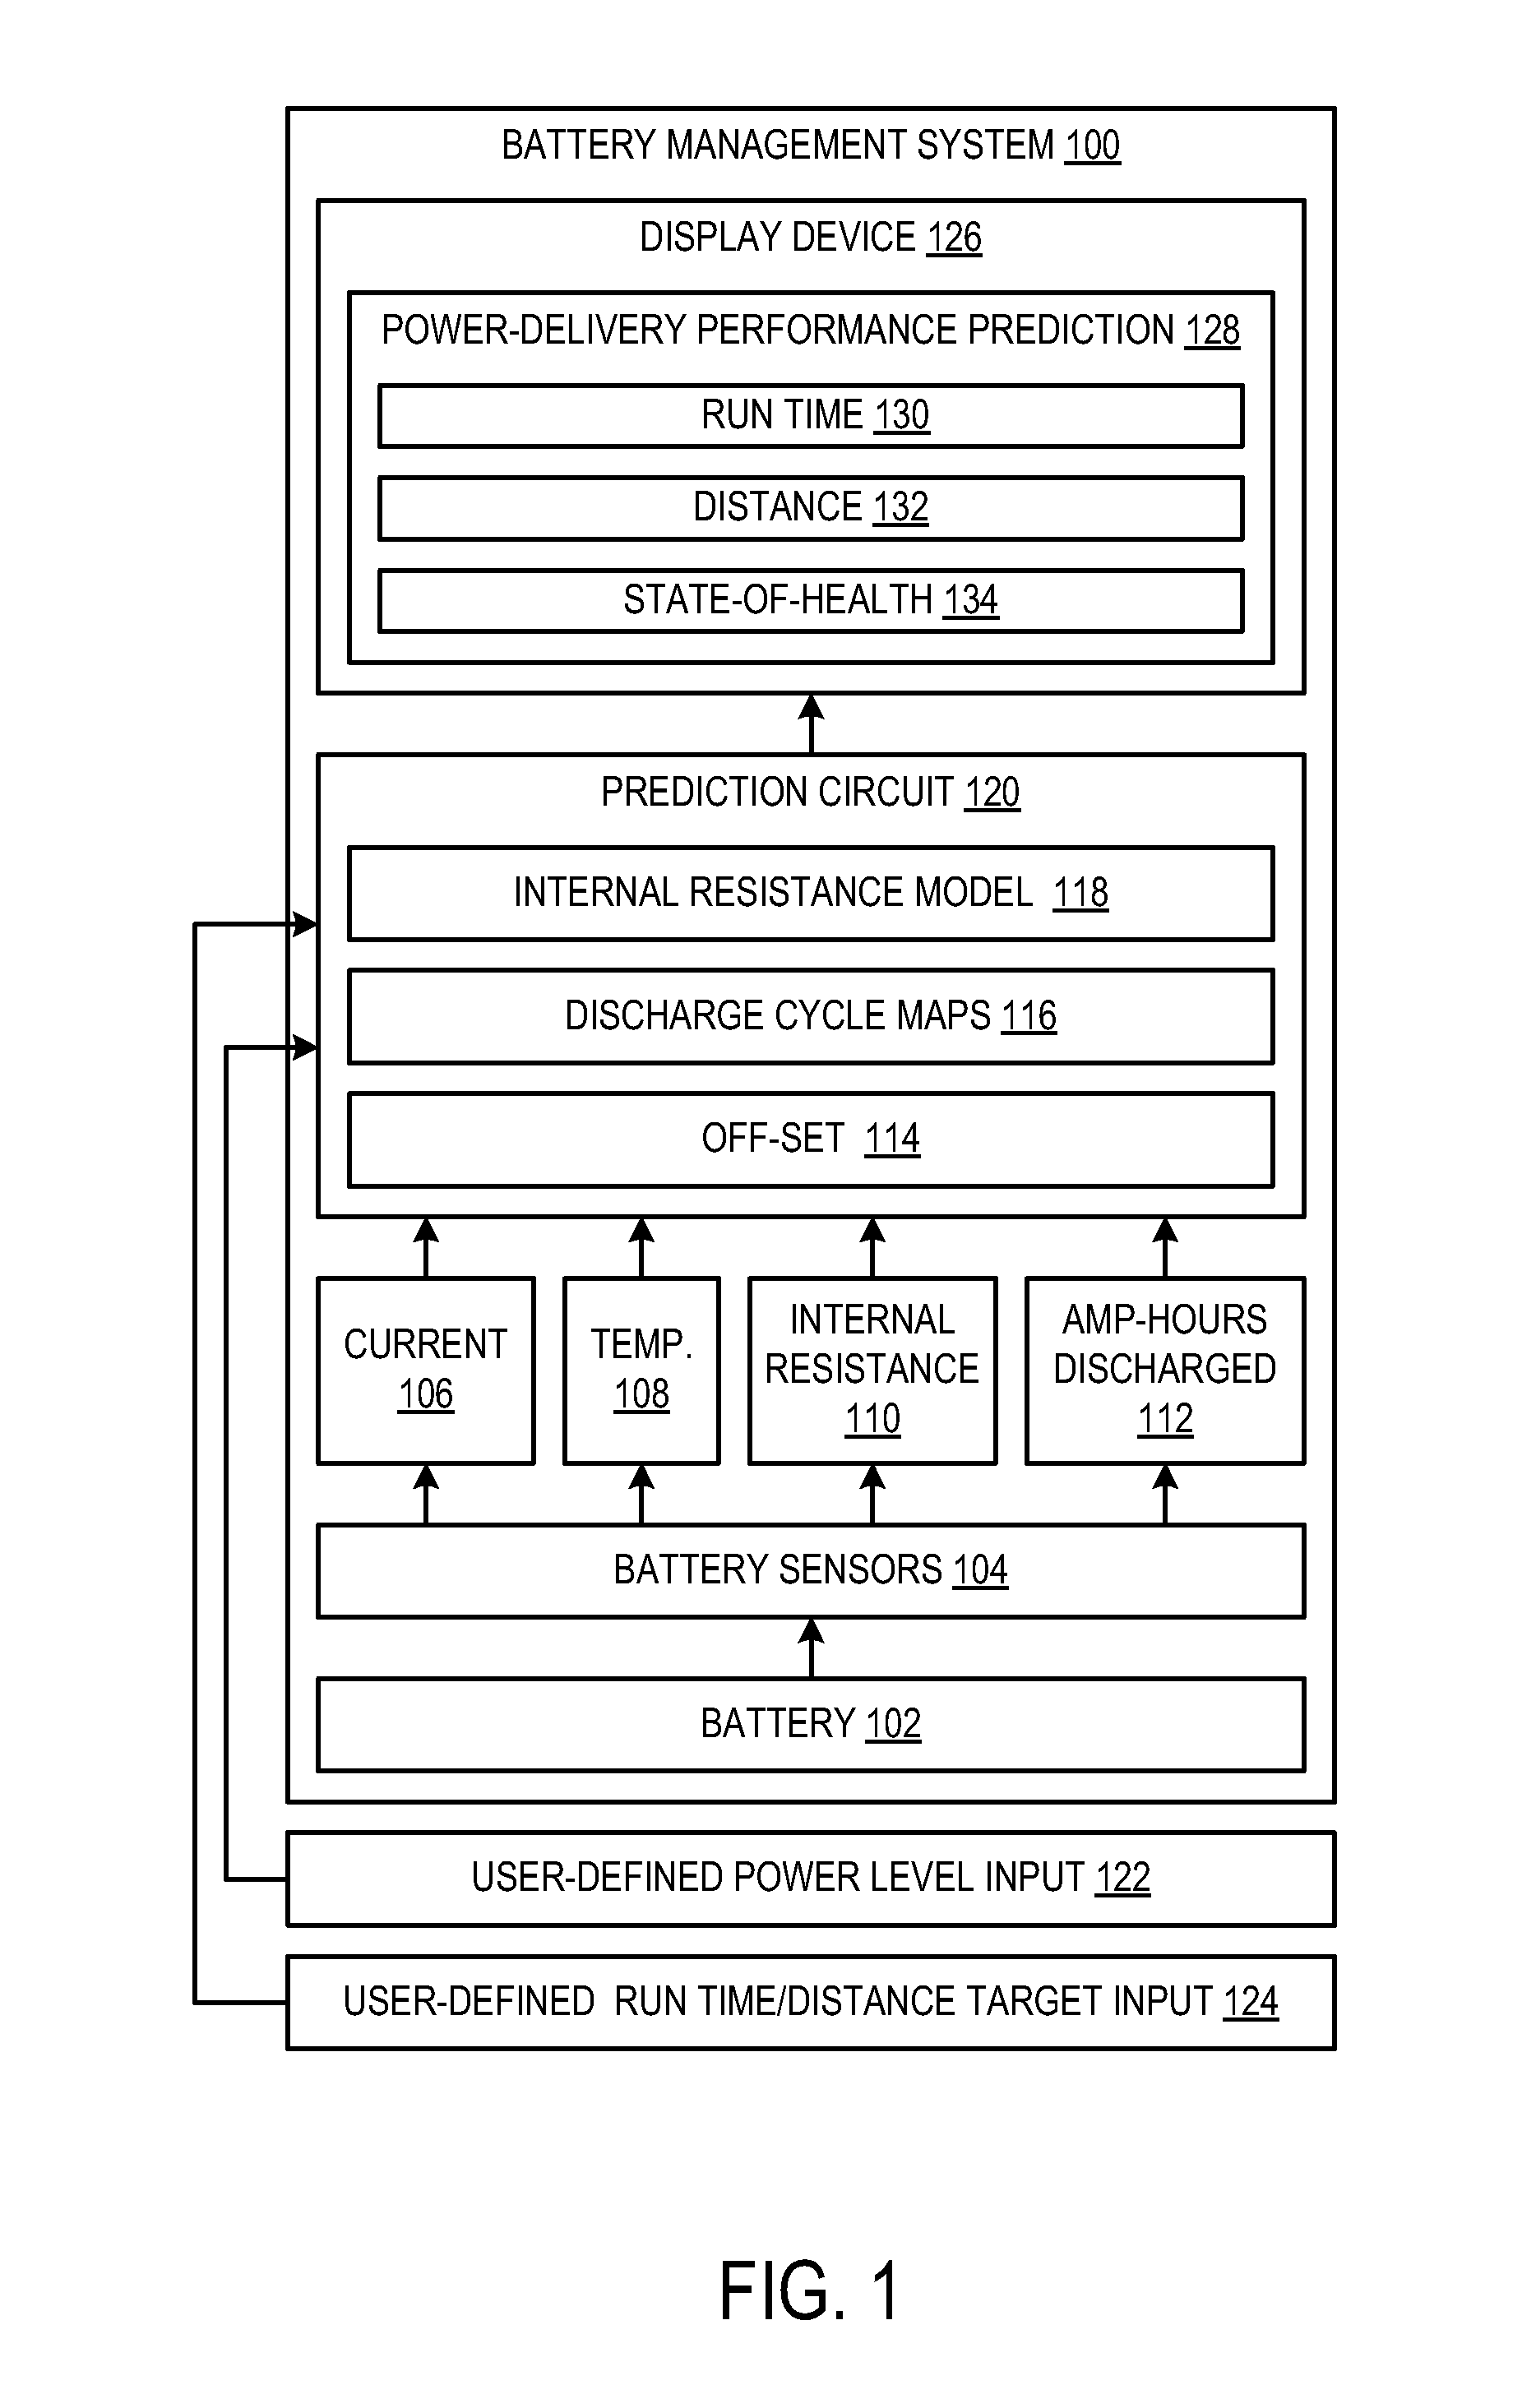 Systems and methods for predicting battery power-delivery performance